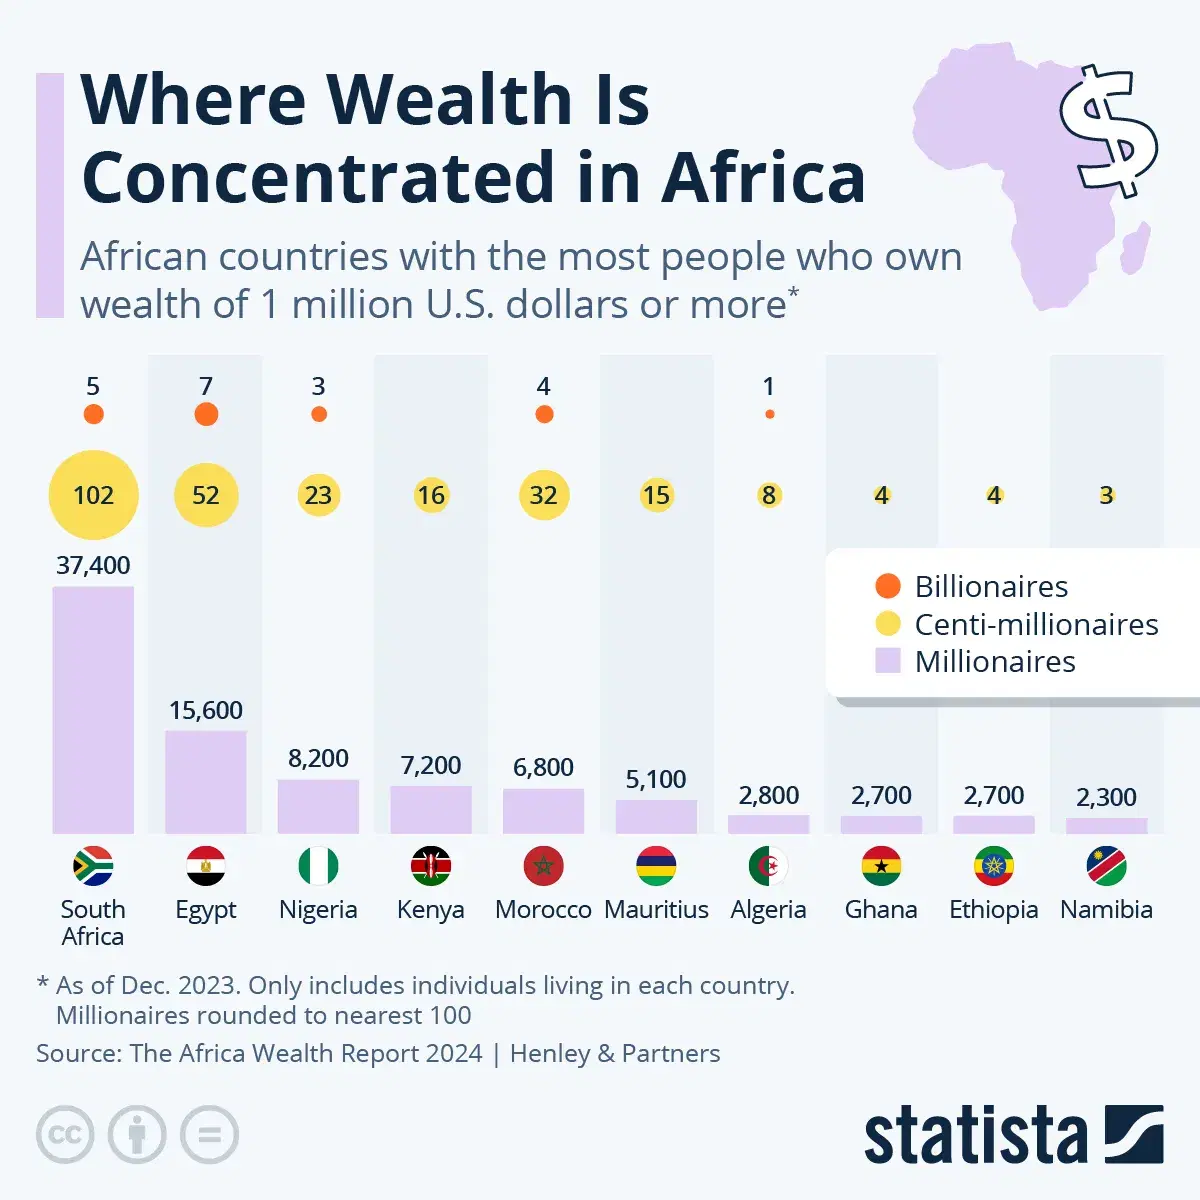 Where Wealth is Concentrated in Africa